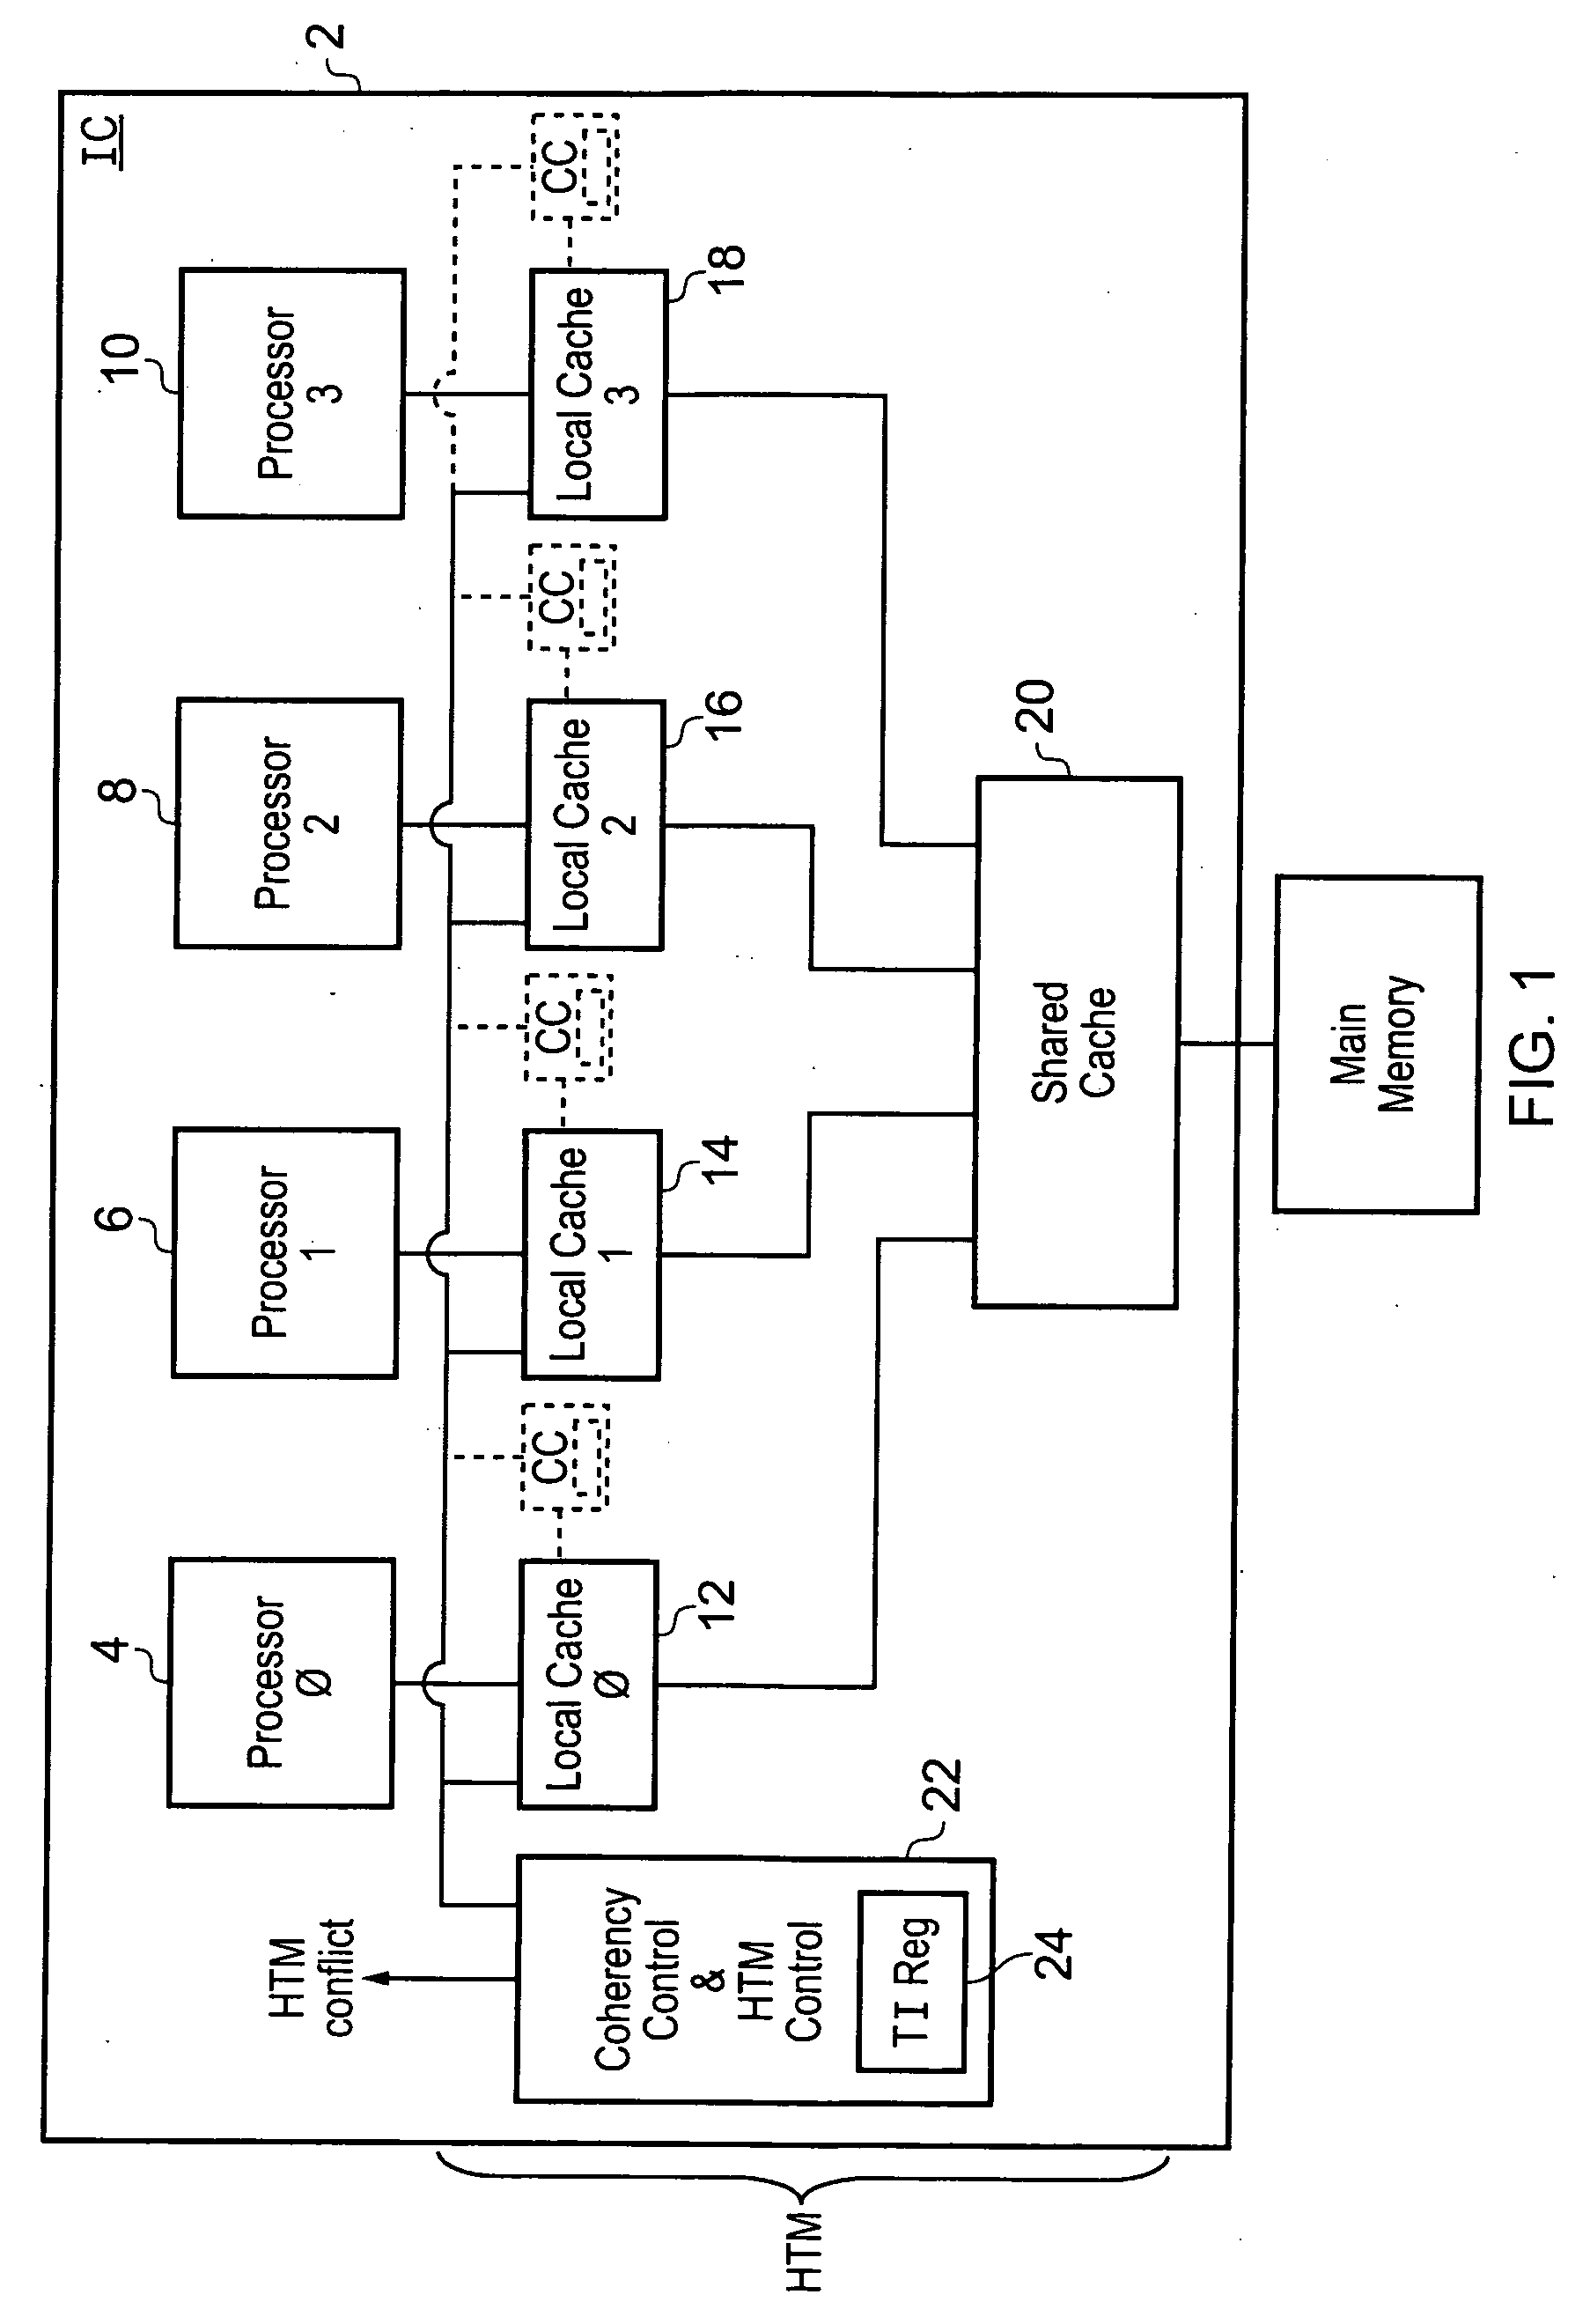 Contention management for a hardware transactional memory